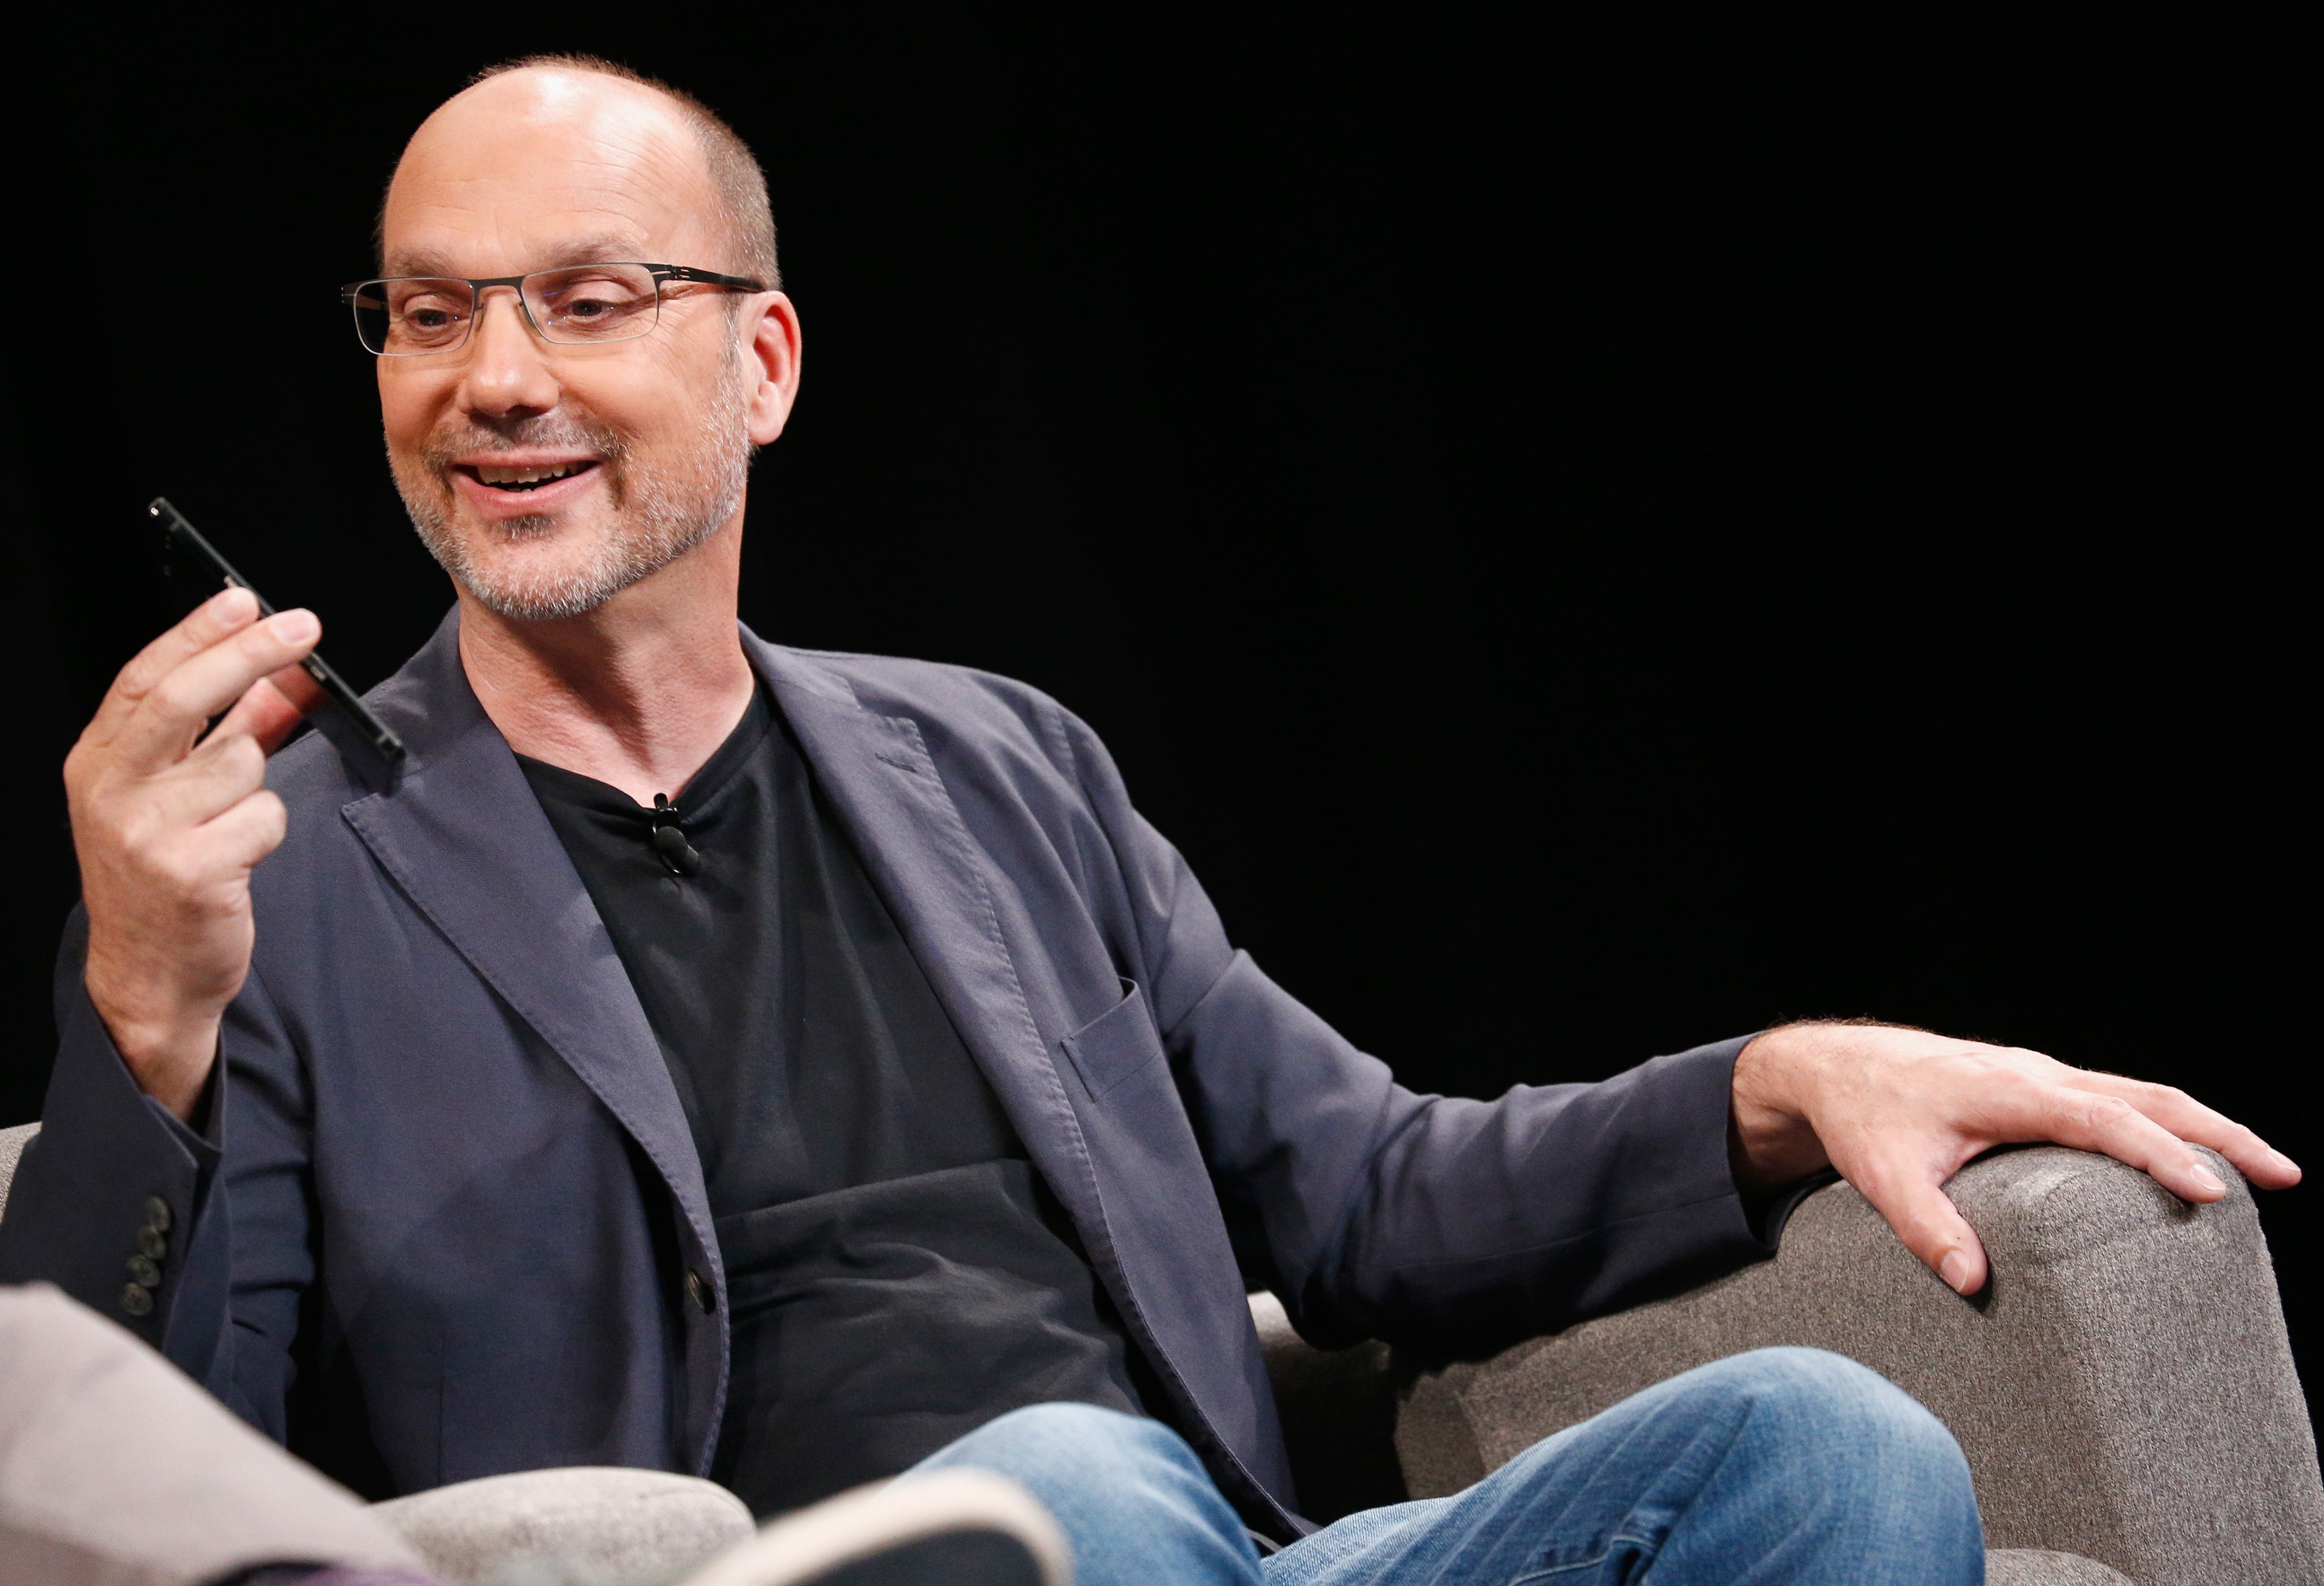 Founder and CEO of Essential Products Andy Rubin speaks onstage at a conference in New York City, on June 7, 2017. (Brian Ach—Getty Images for Wired)